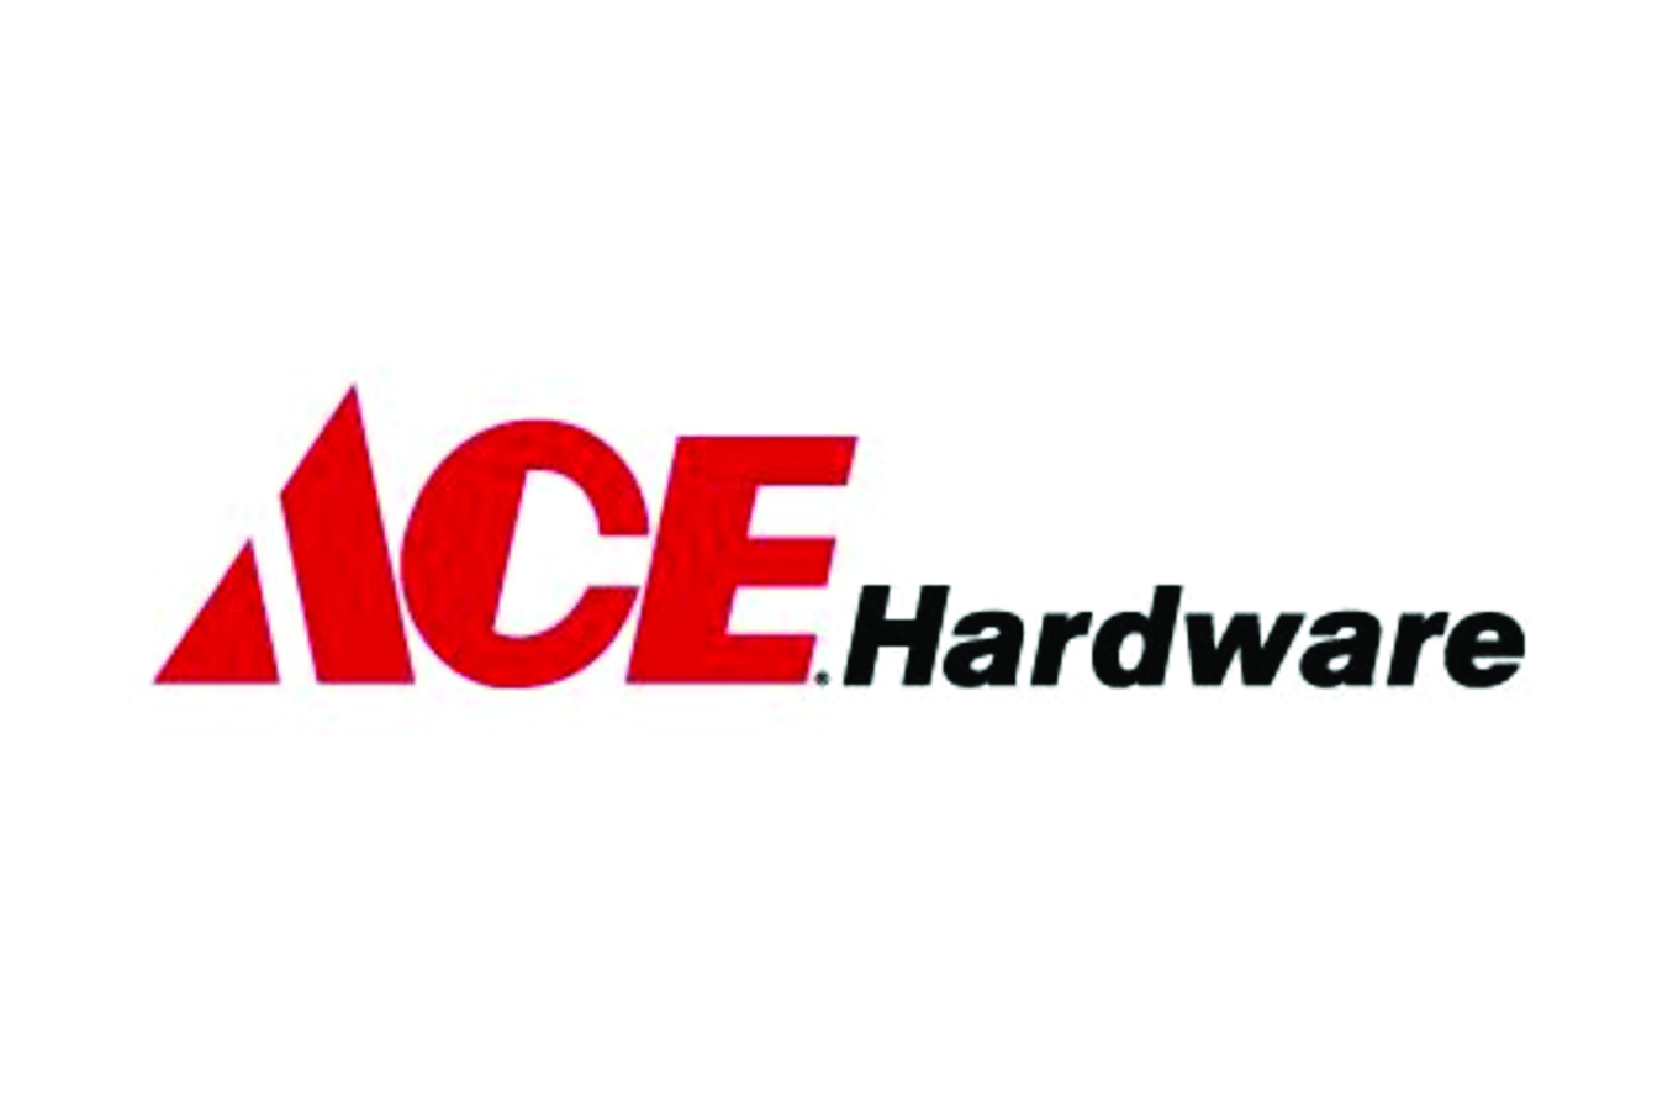 Ace Hardware and Element Outfitters of Pocatello.